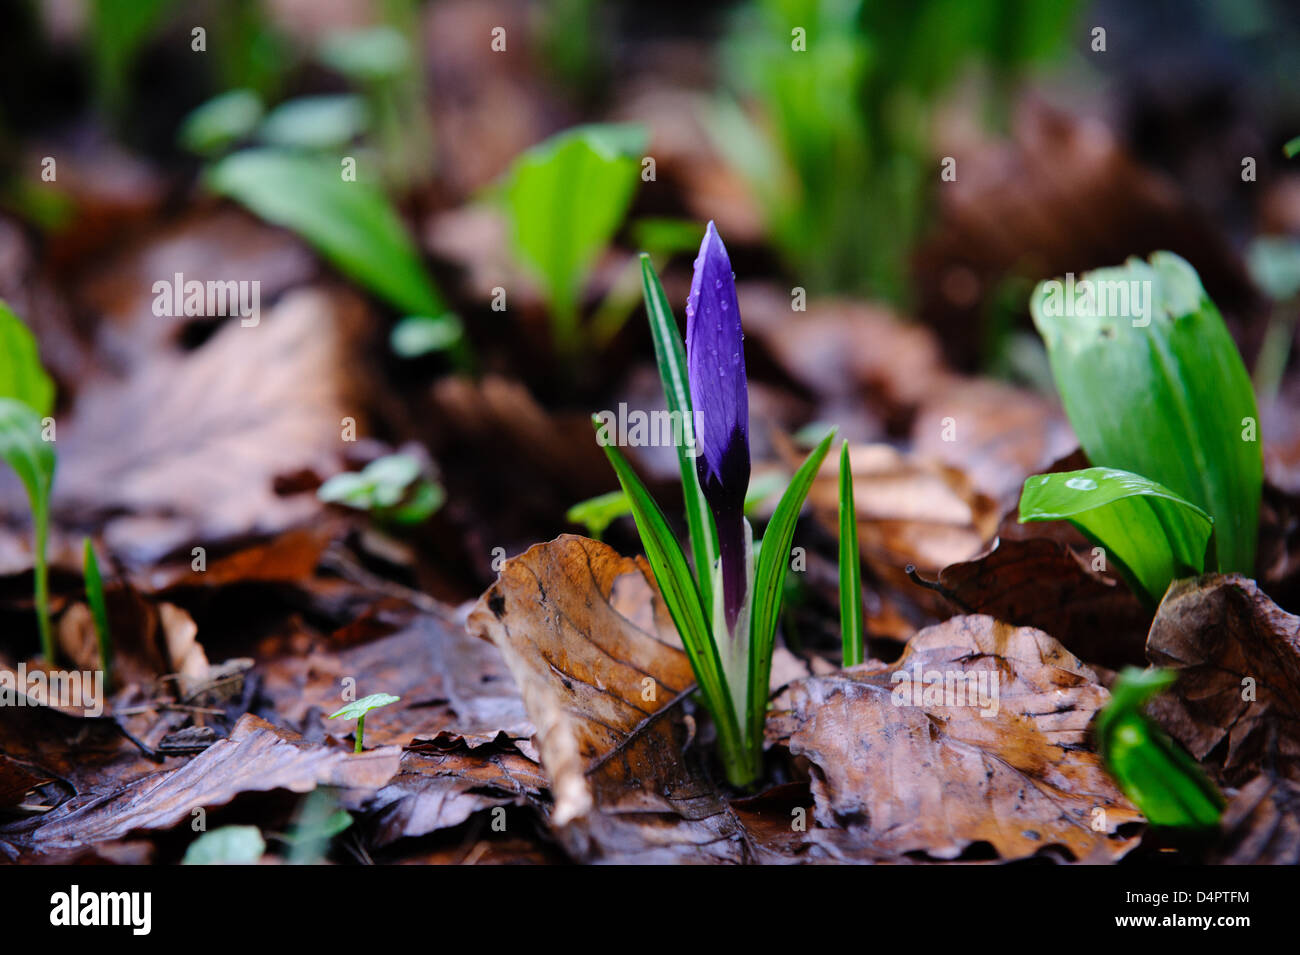 Lone Crocus signifies the start of spring. Stock Photo